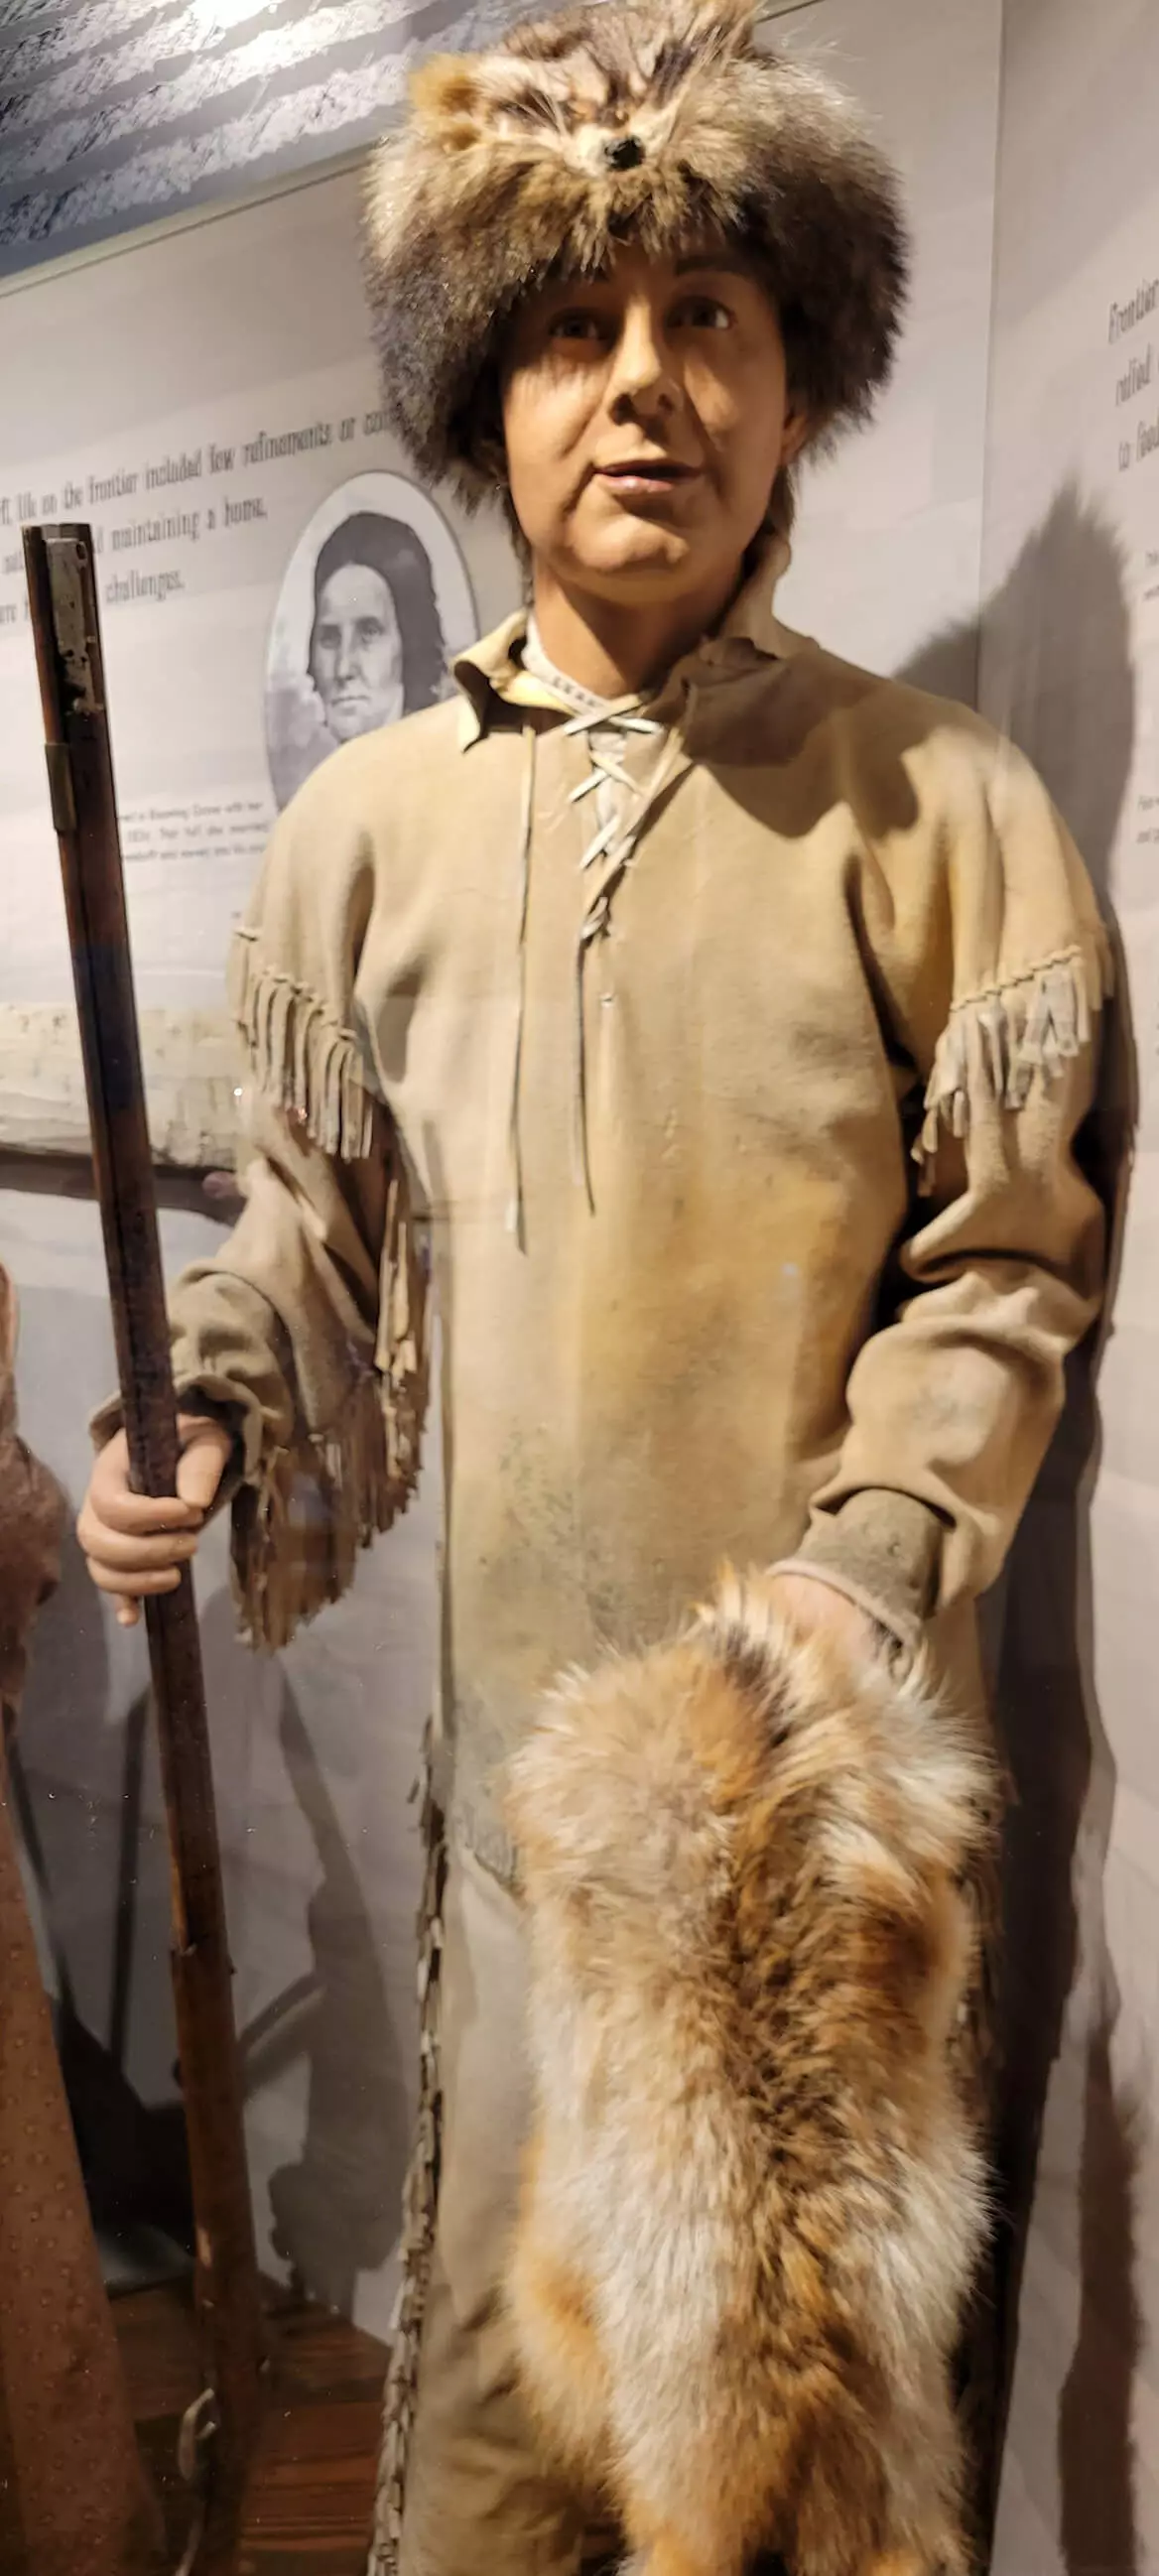 A white, male mannequin dressed in buckskin, standing with a wooden rifle in one hand and a fur in the other hand.